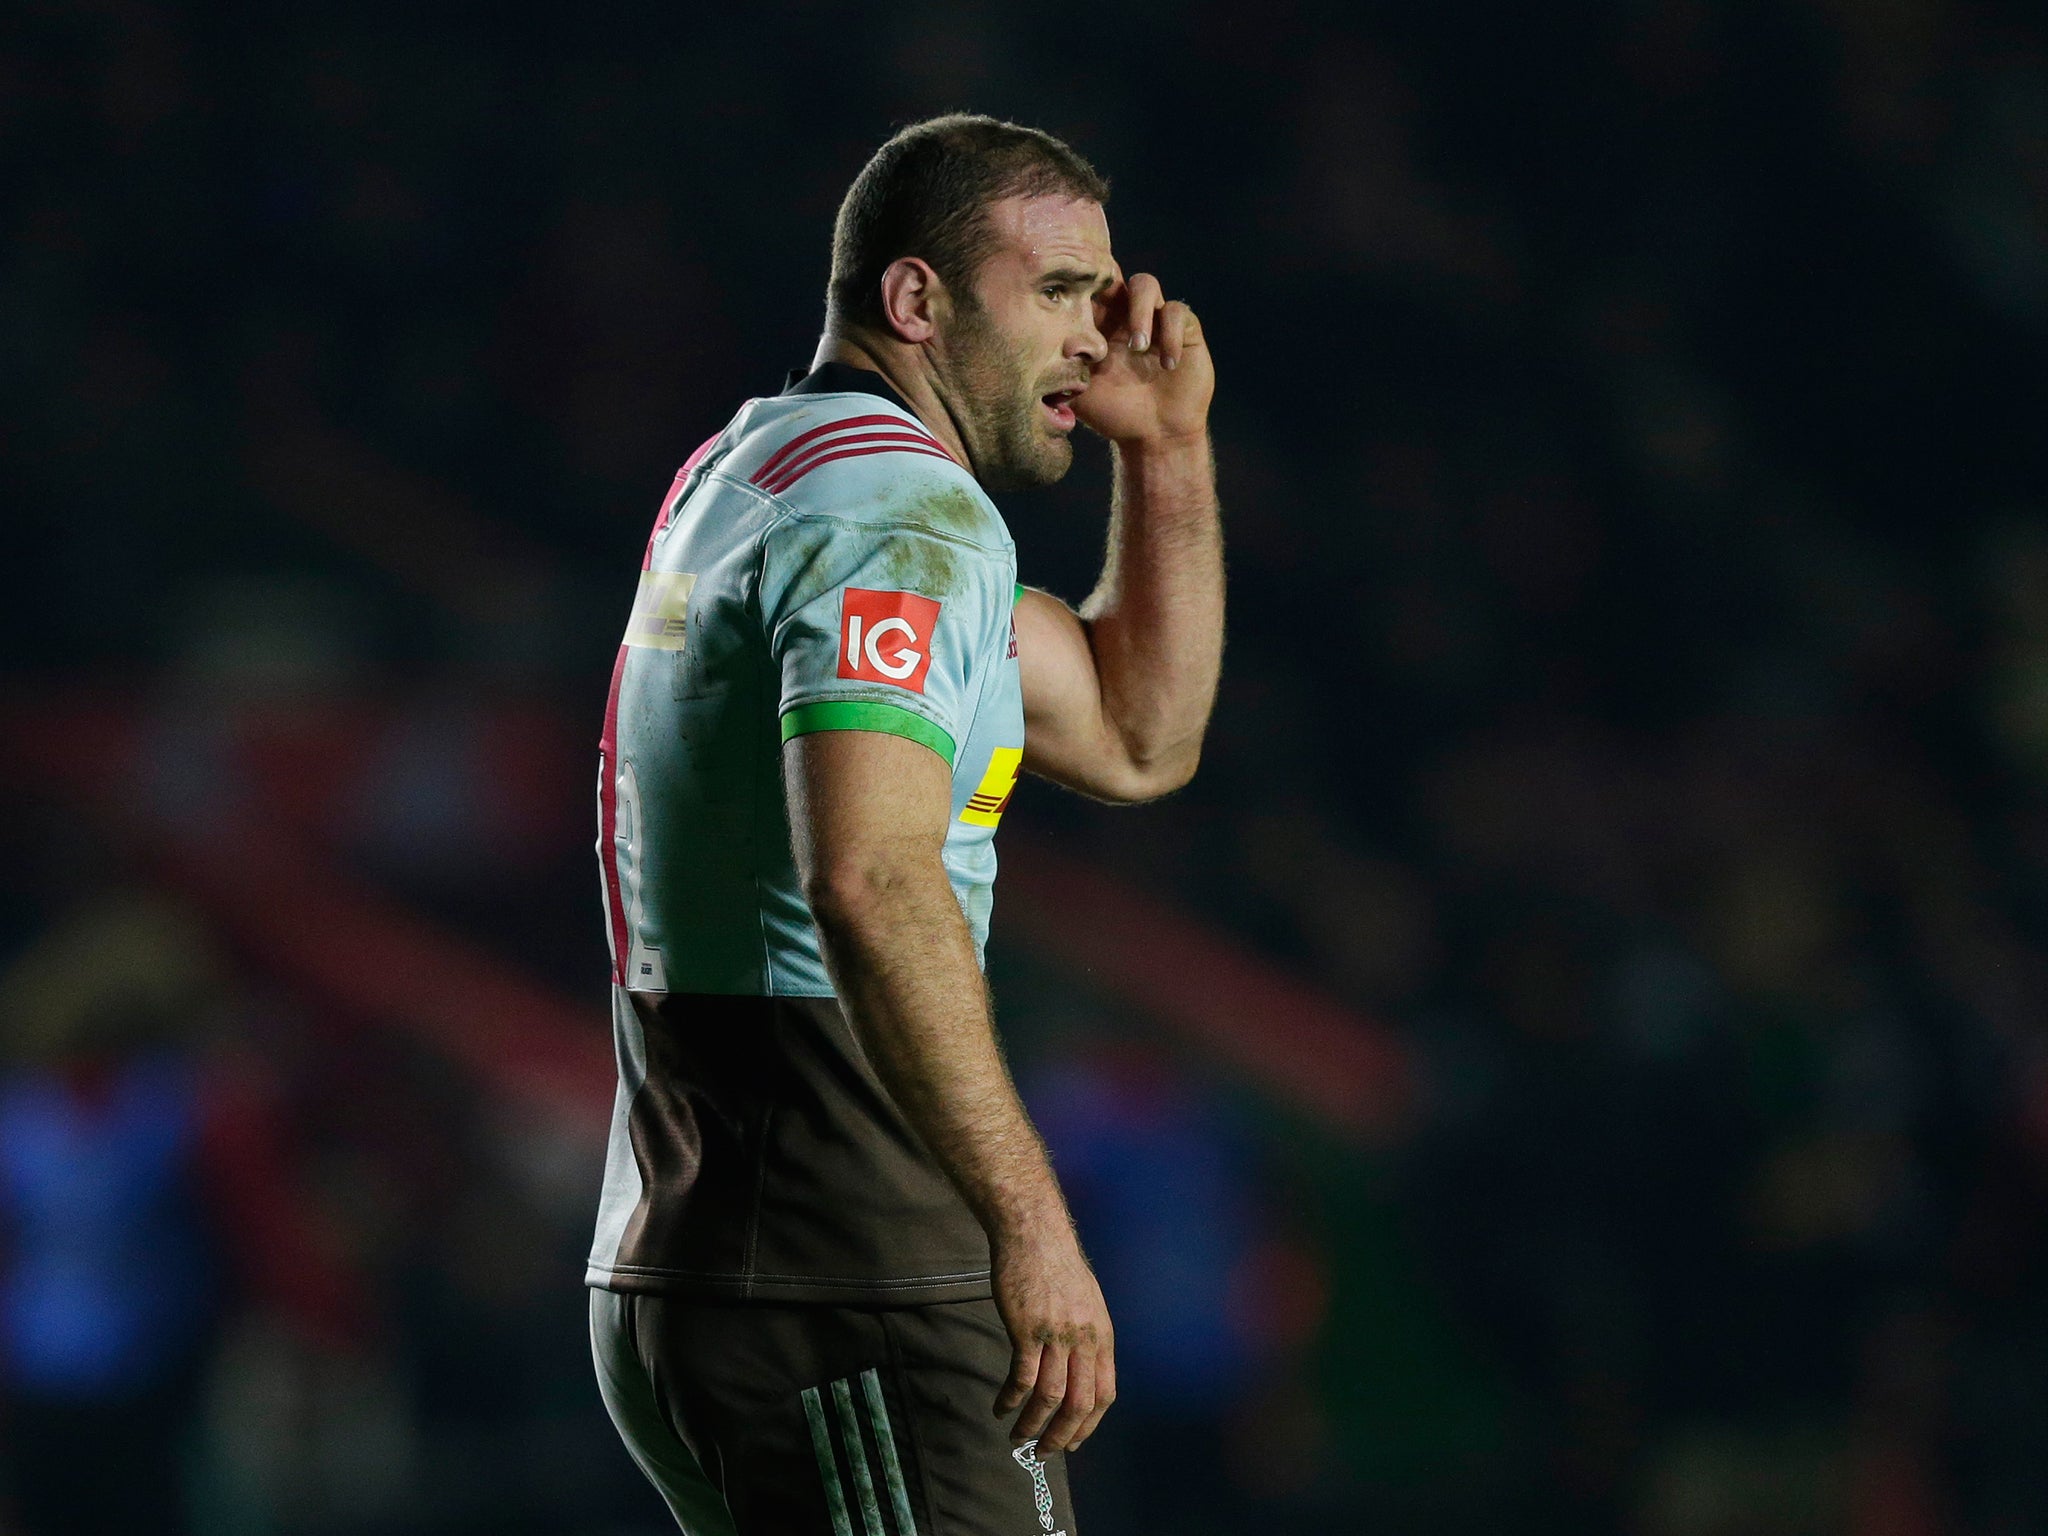 Jamie Roberts will join Bath when he leaves Harlequins at the end of the season